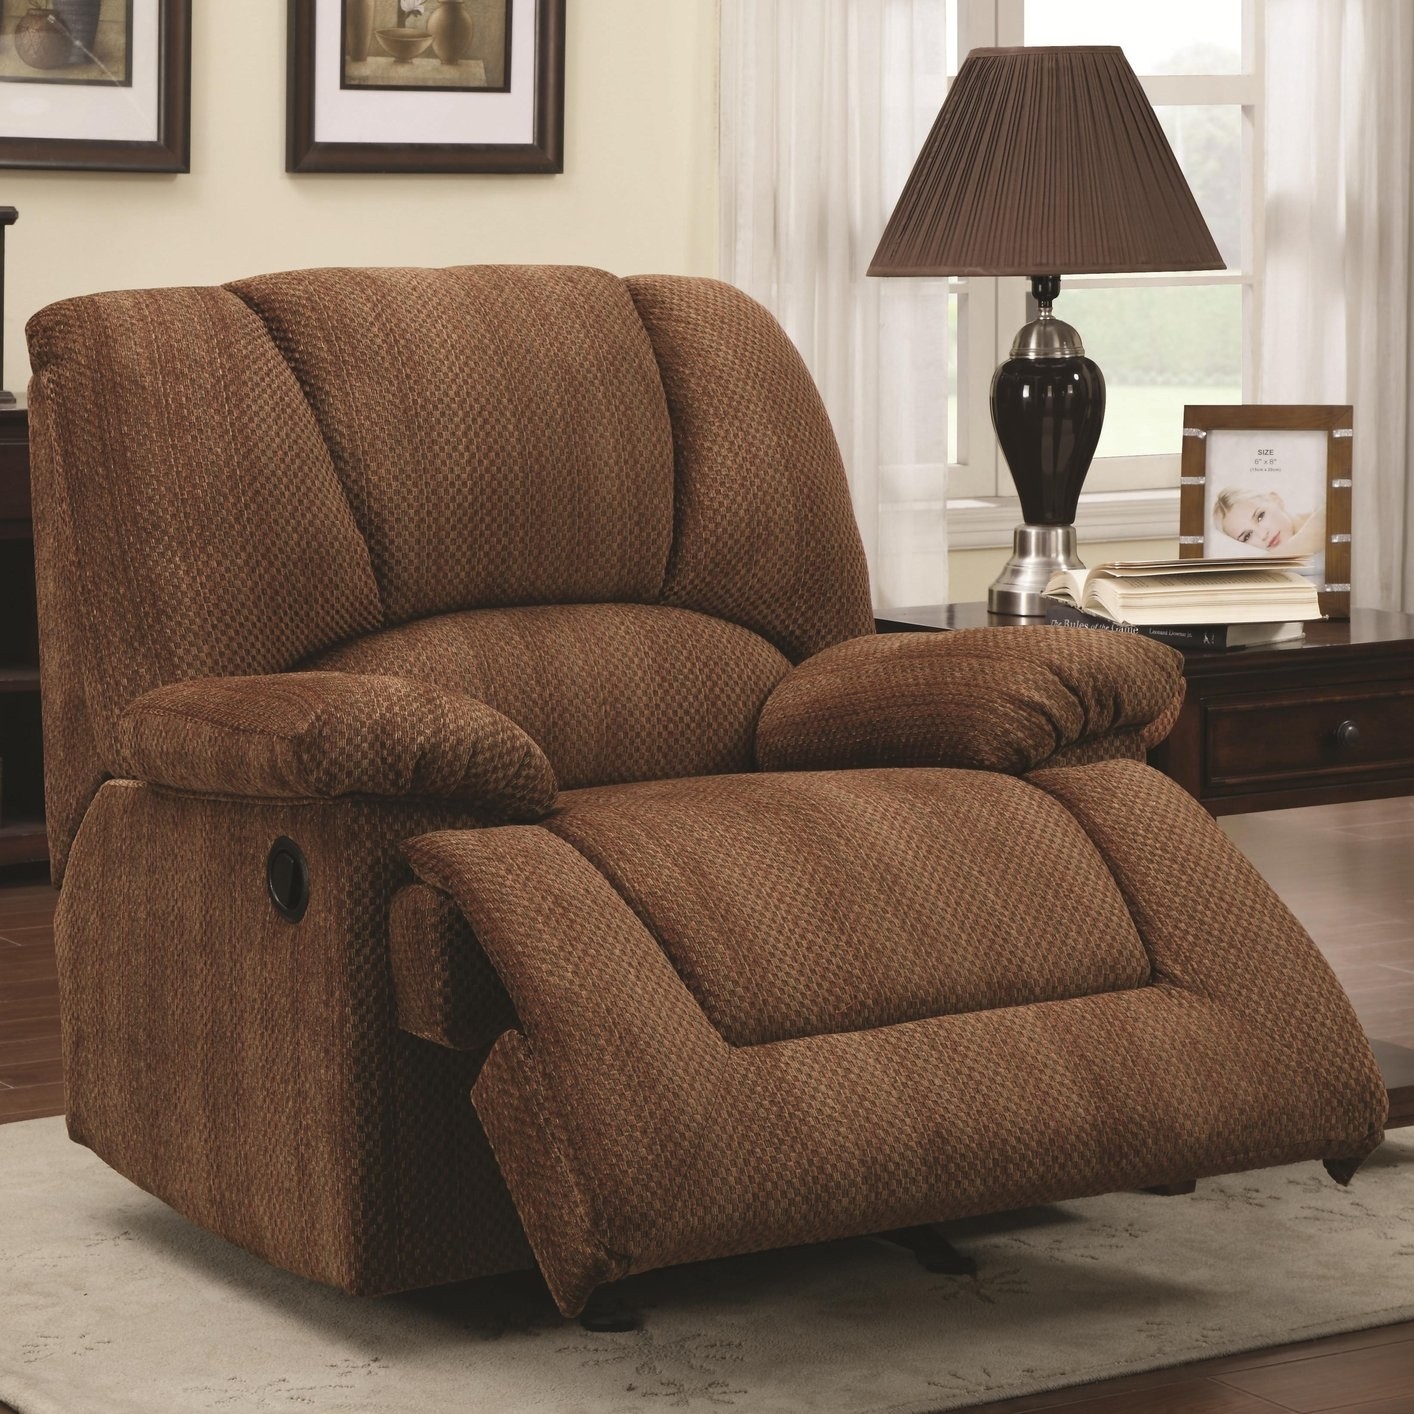 Extra large glider rocker recliner chair with wide sitting area